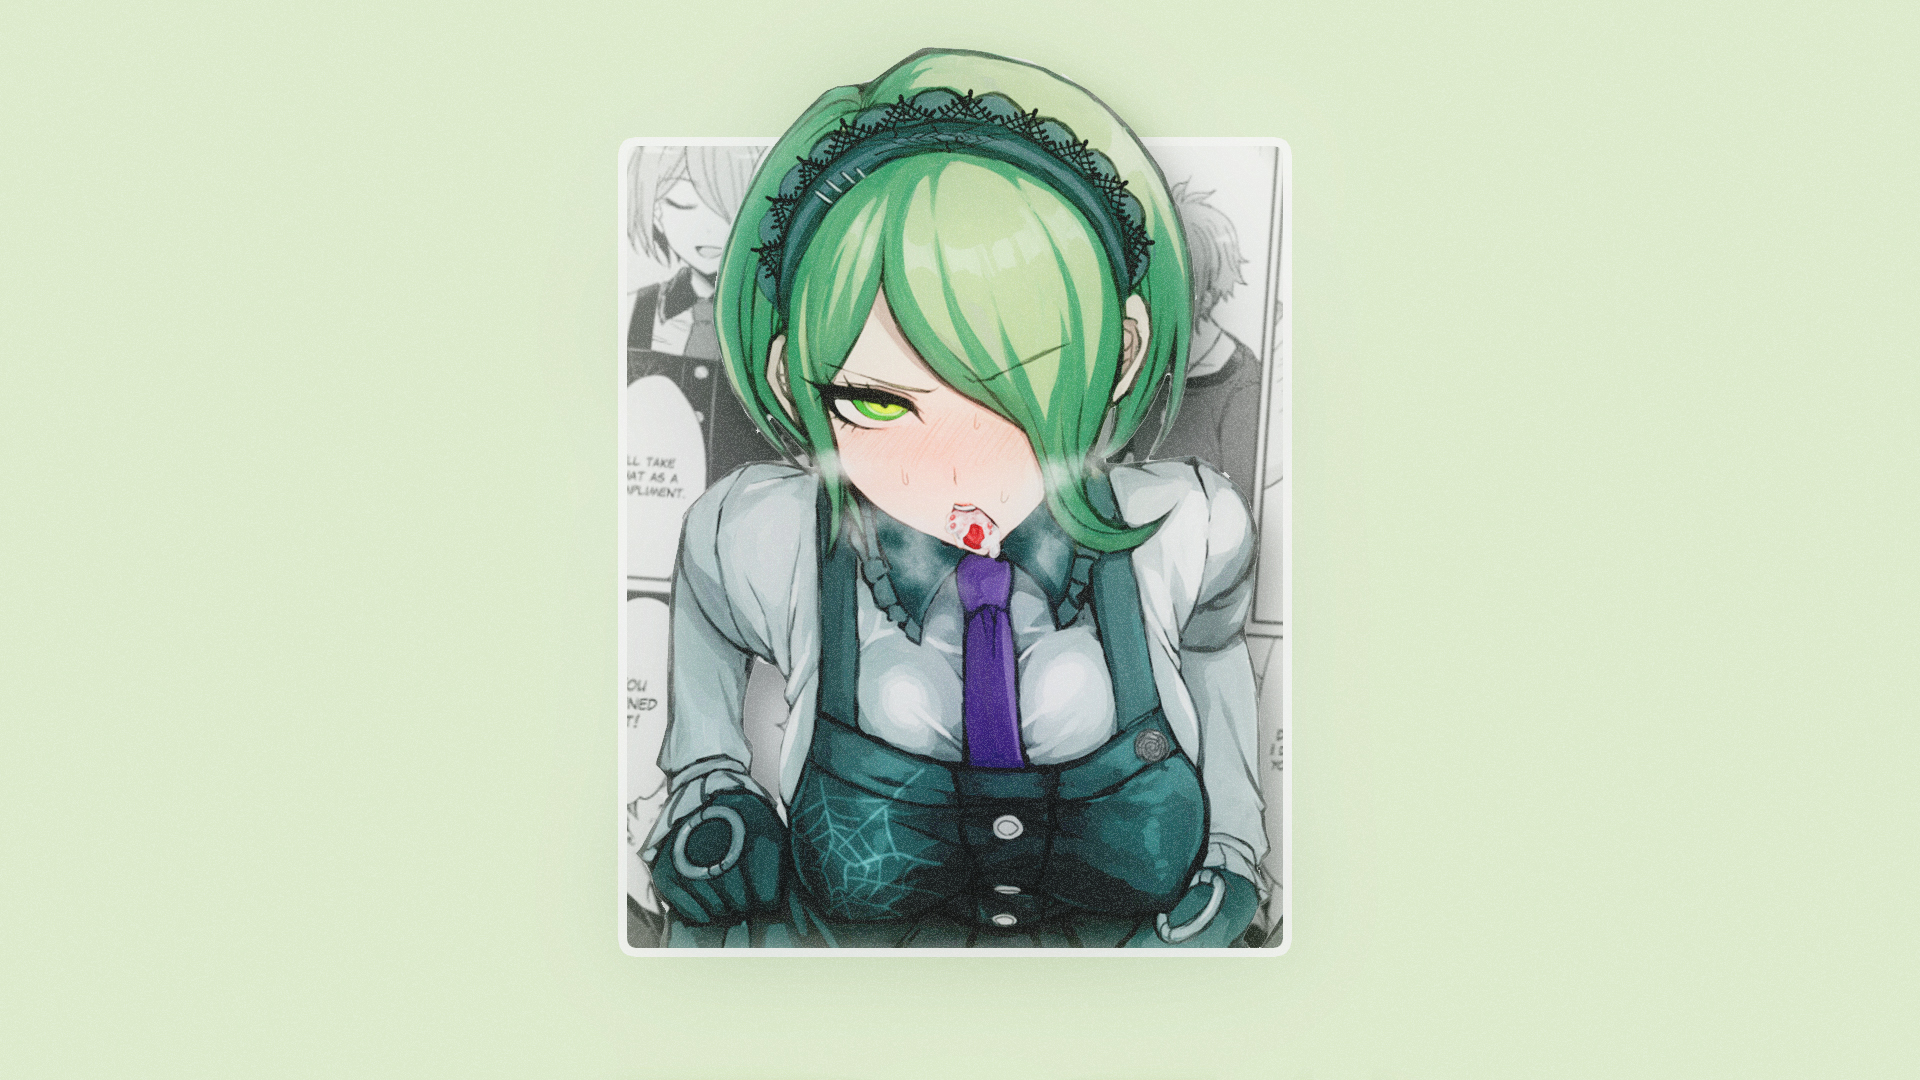 Anime 1920x1080 anime anime girls minimalism simple background picture-in-picture speech bubble Danganronpa Kirumi Tojo open mouth suggestive hair over one eye